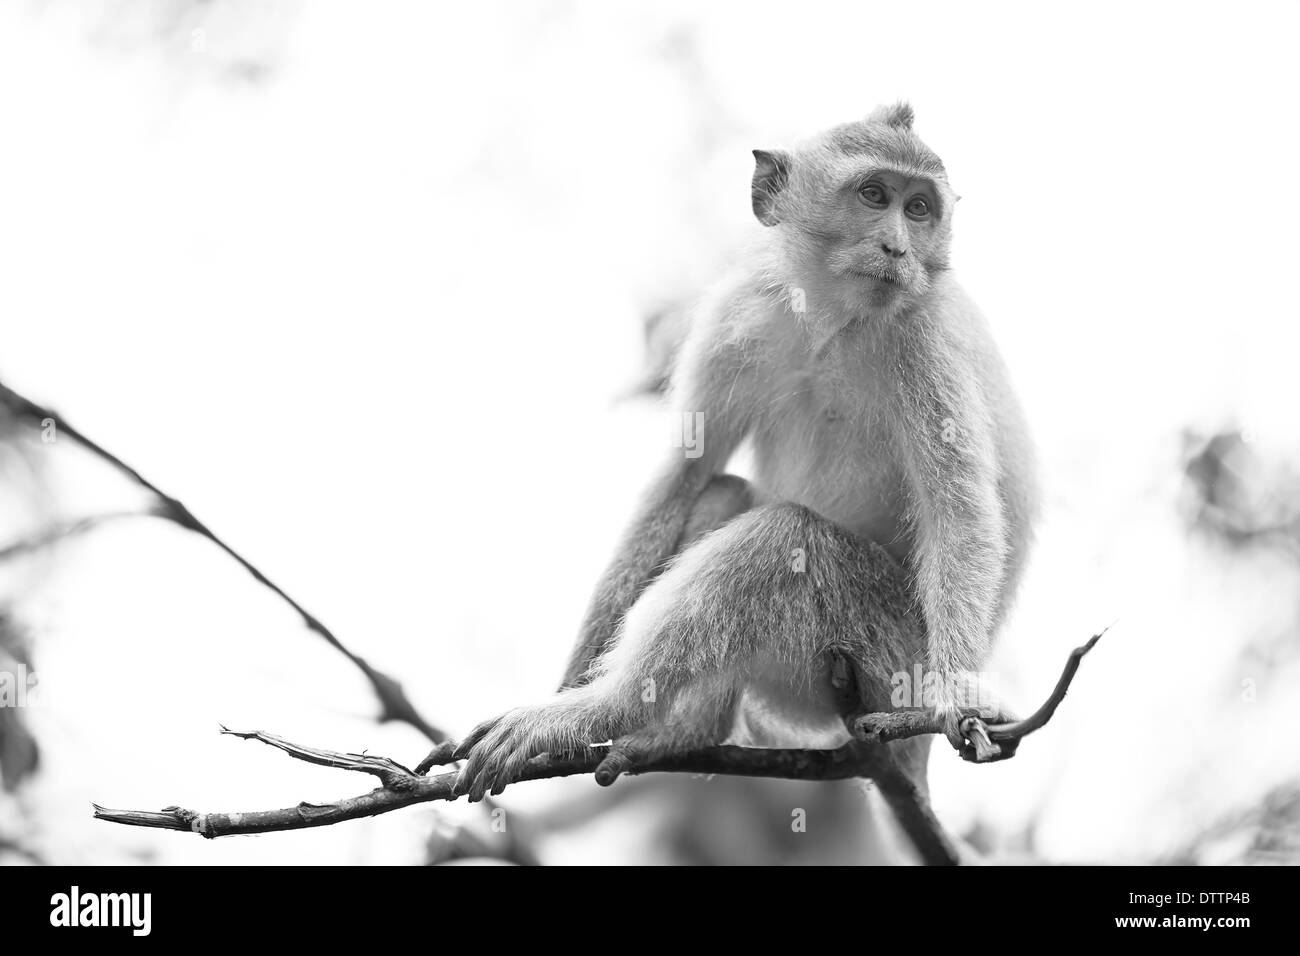 Long-tailed Macaque Monkey Stockfoto